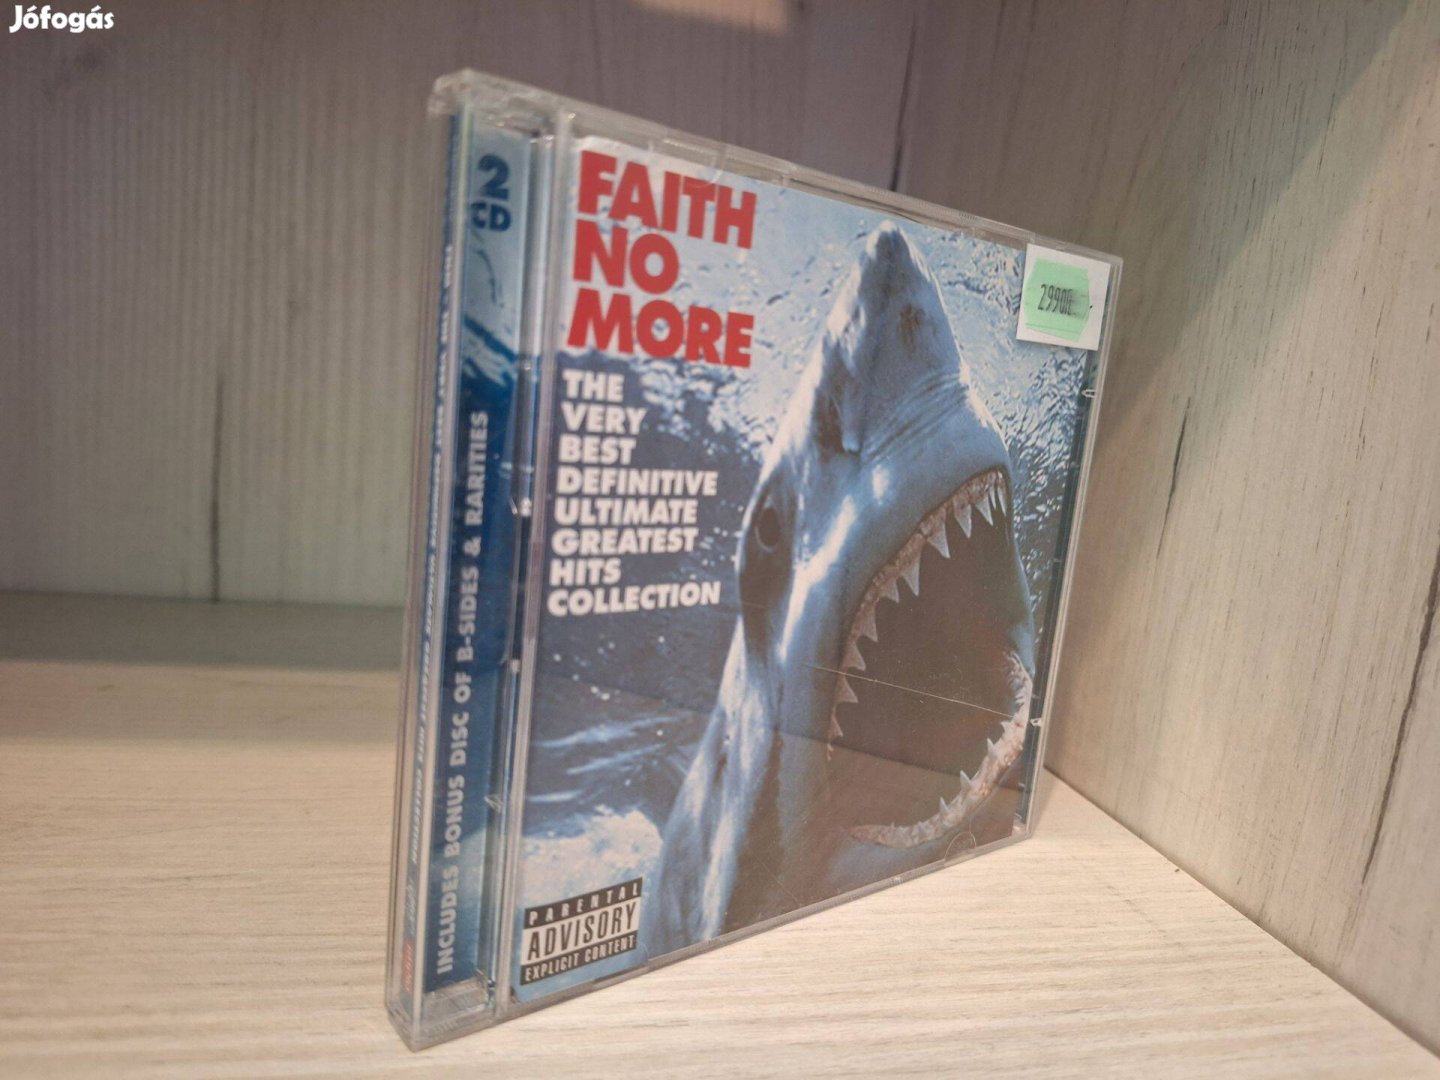 Faith No More - The Very Best Definitive Ultimate Greatest Hits 2x CD